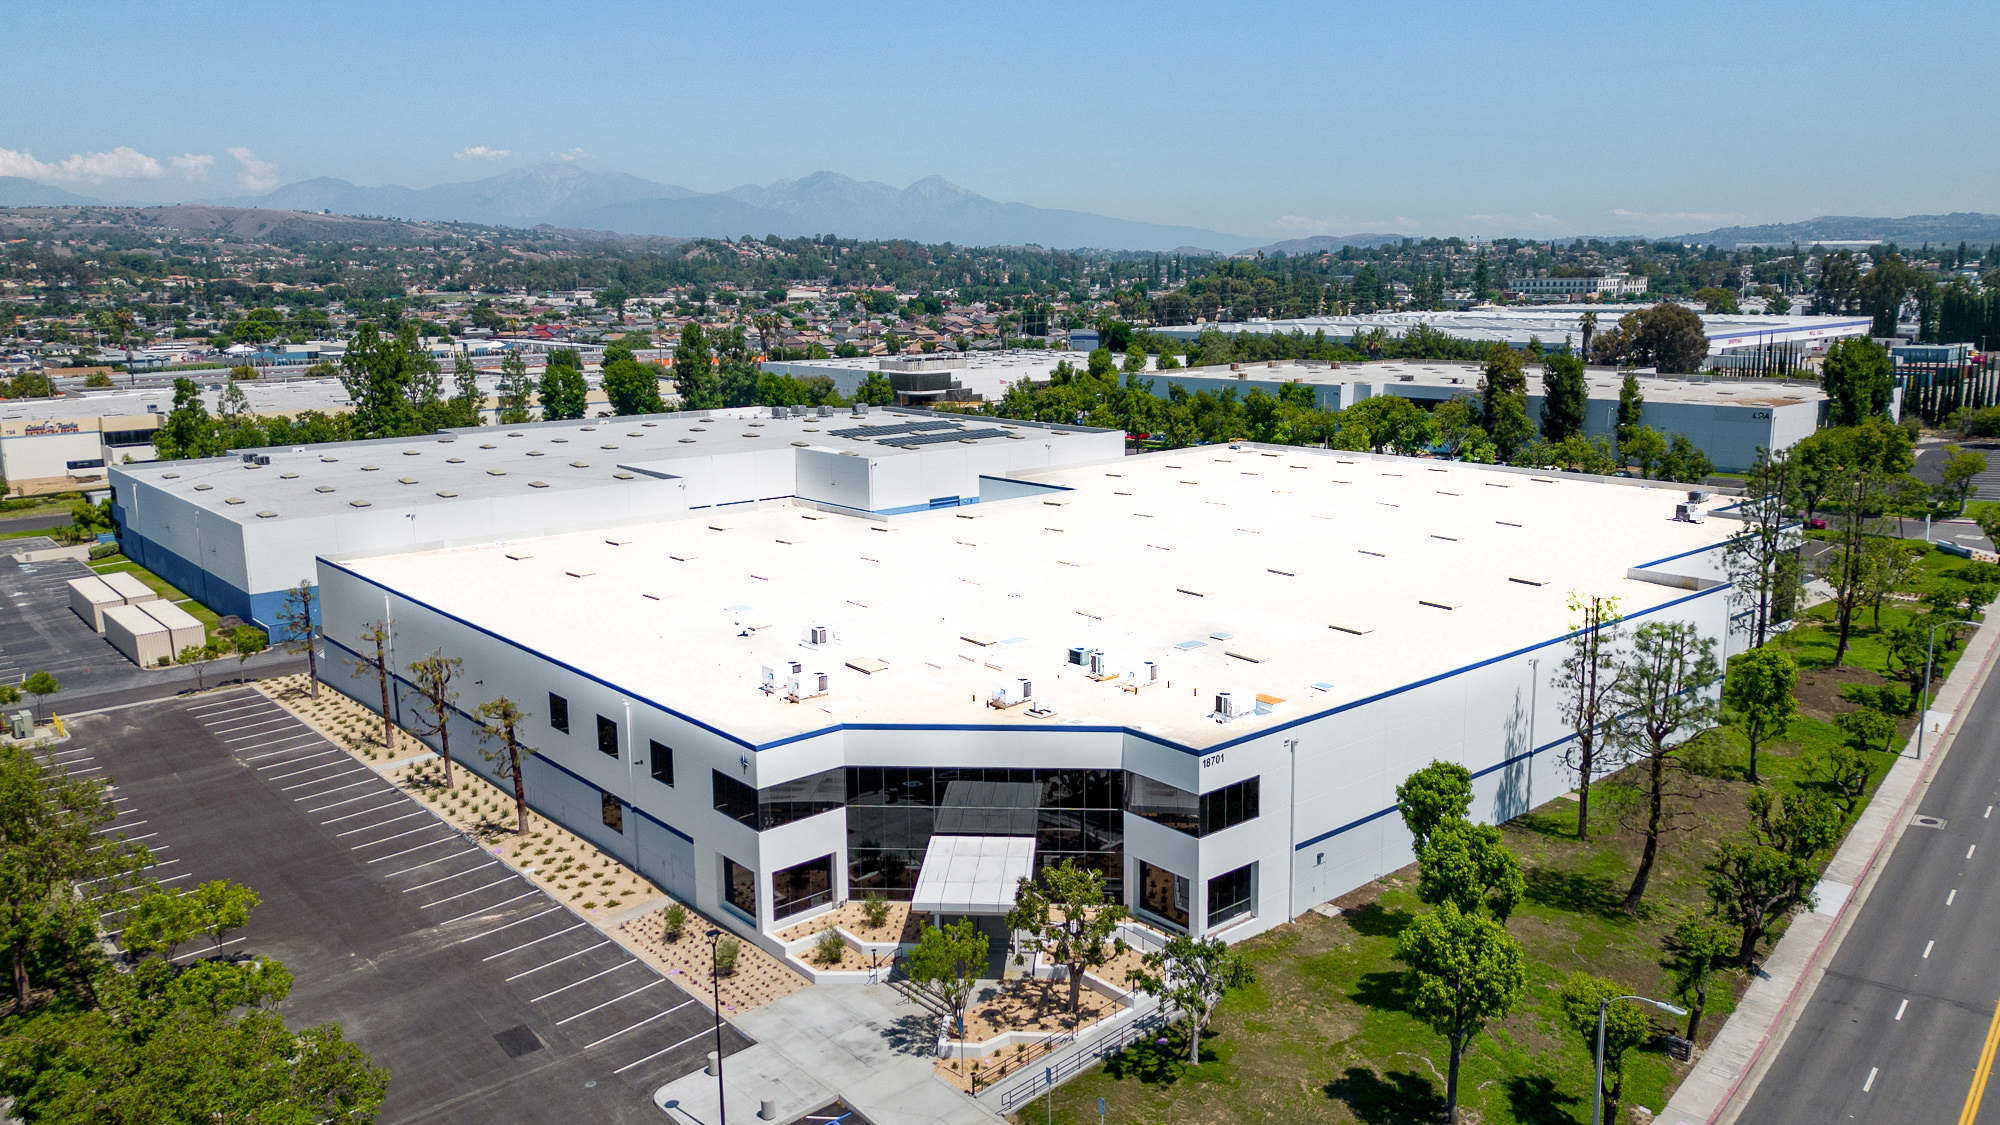 Staley Point Capital and Bain Capital Announce Sale of Industrial Property in Southern California for $38.4 Million